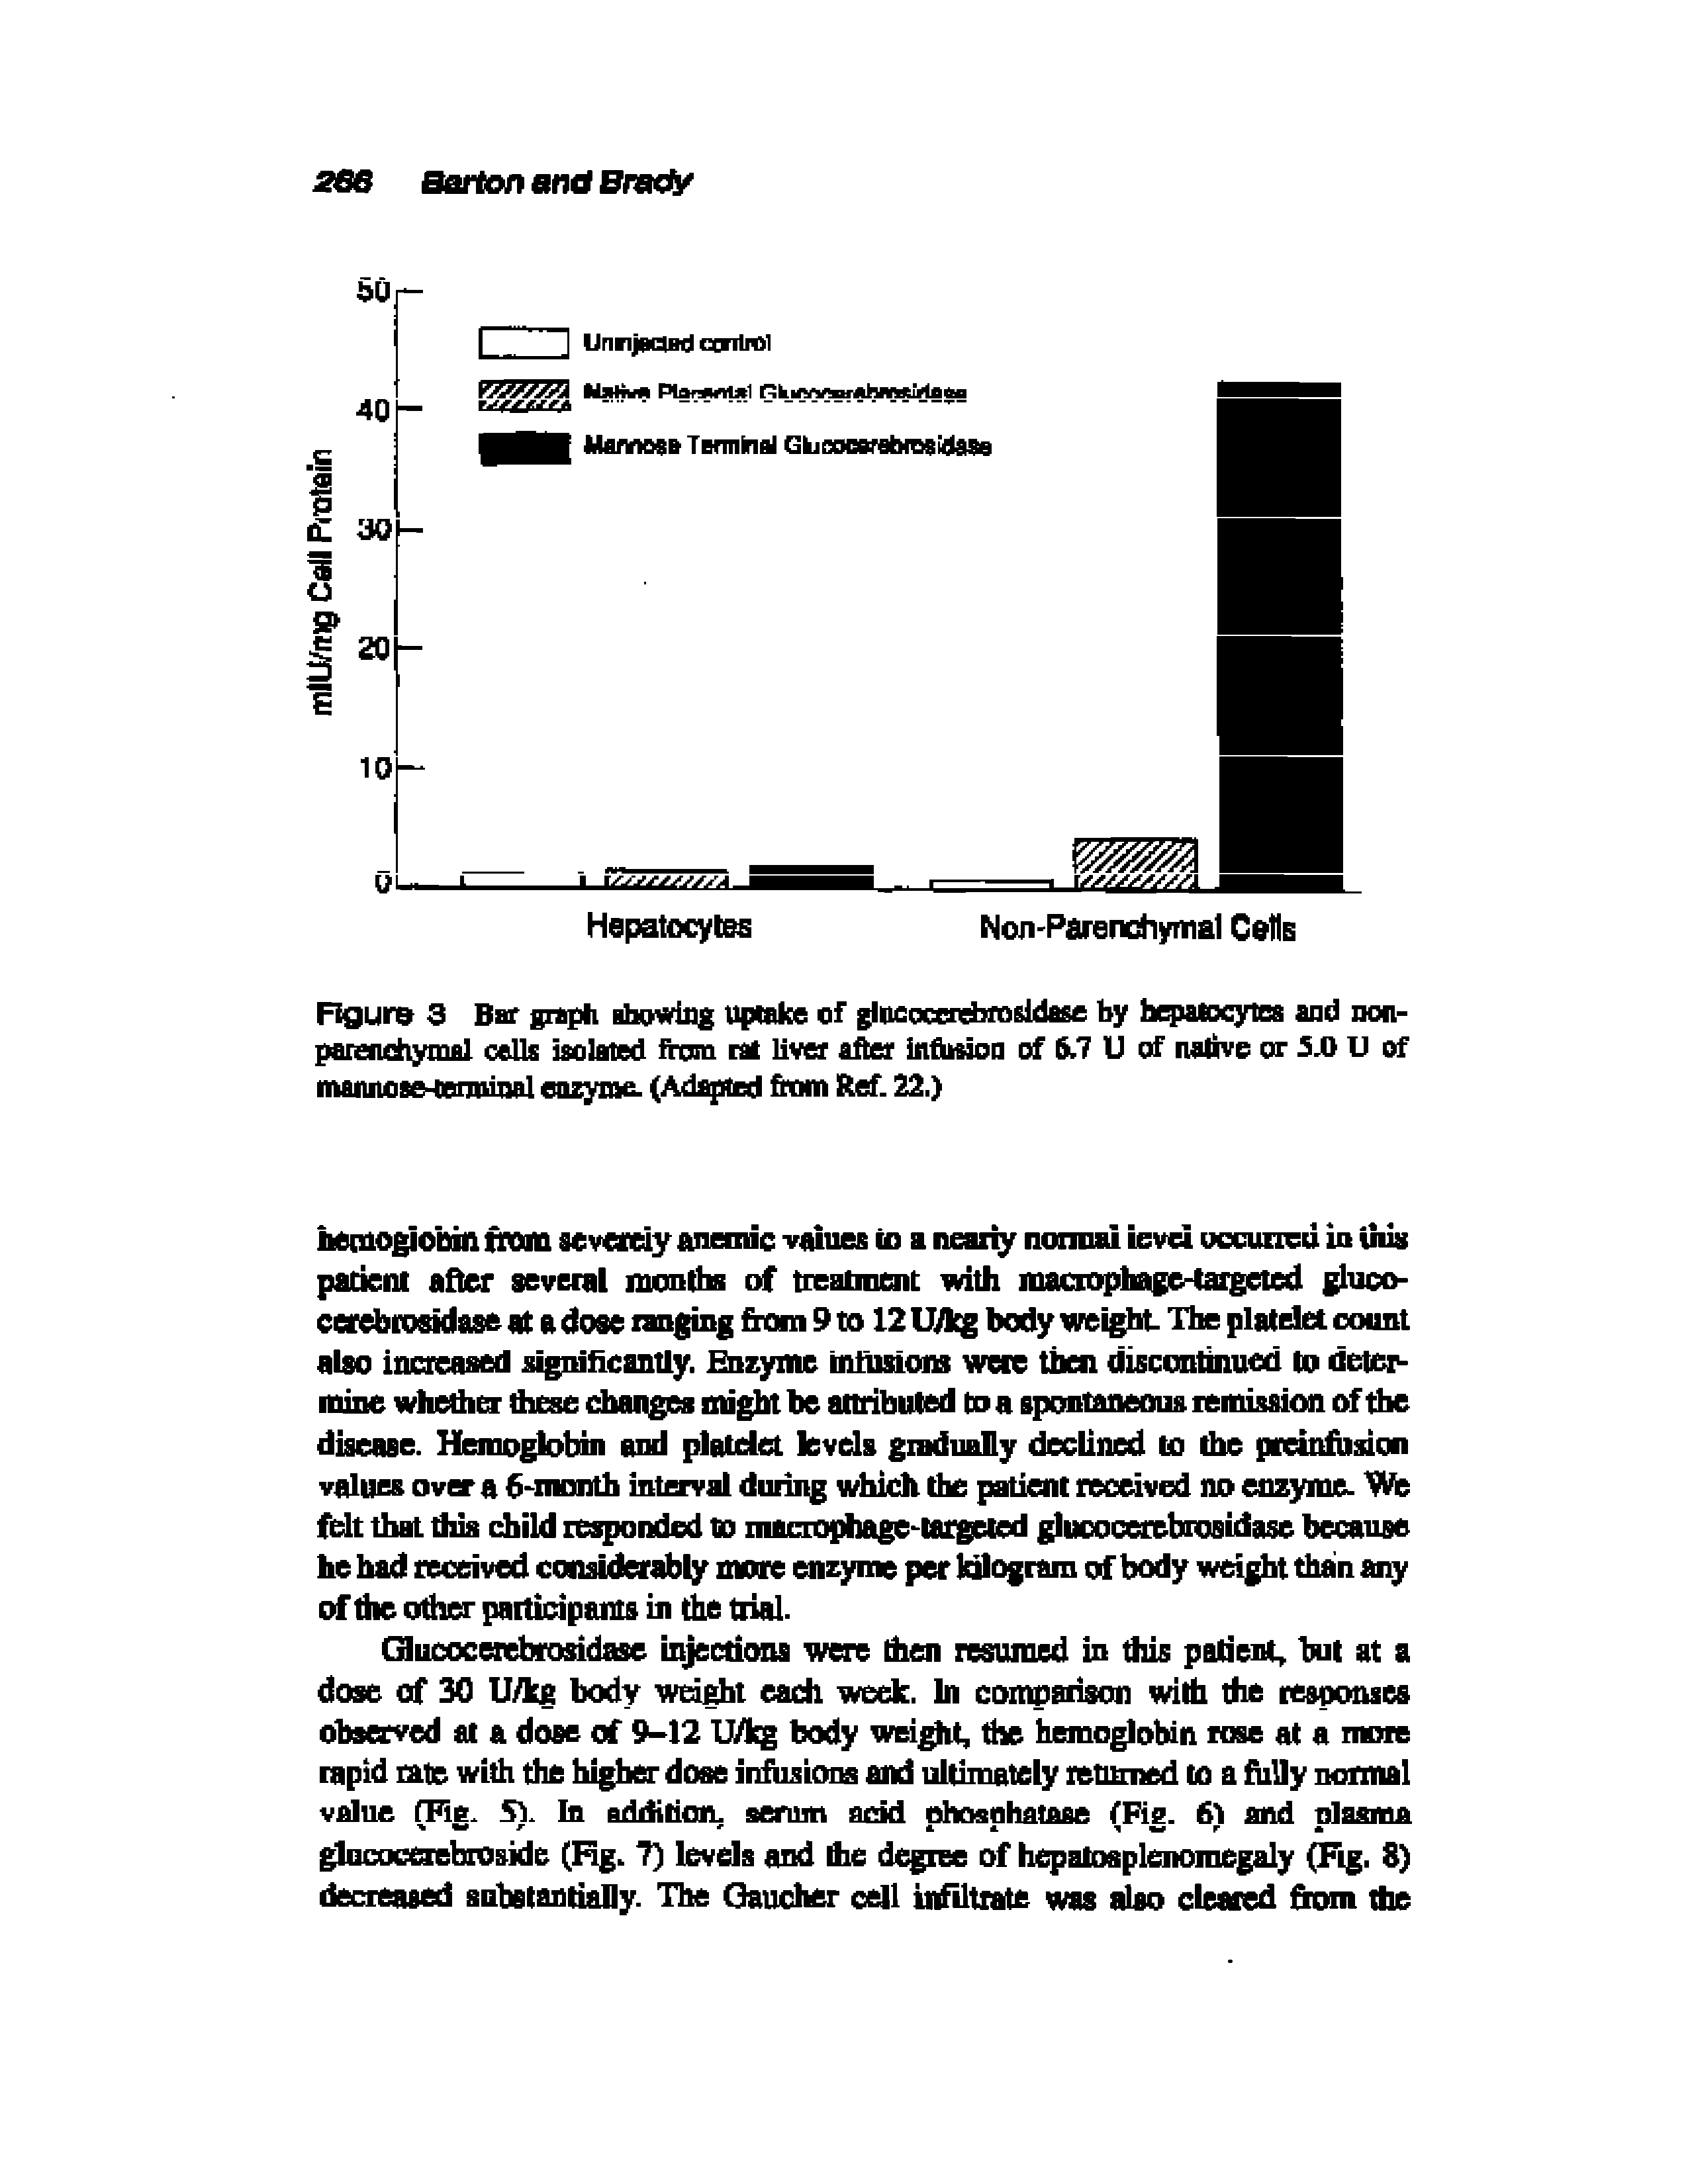 Figure 3 Bar graph showing uptake of glncocengbrosldase by hcpaiocytcs and non-panoichymfll cells isolated from rat liver alter inflnion of 5.7 U of native or 5.0 U of mannose-terminal enzyme. (Adapted from Ref. 22.)...